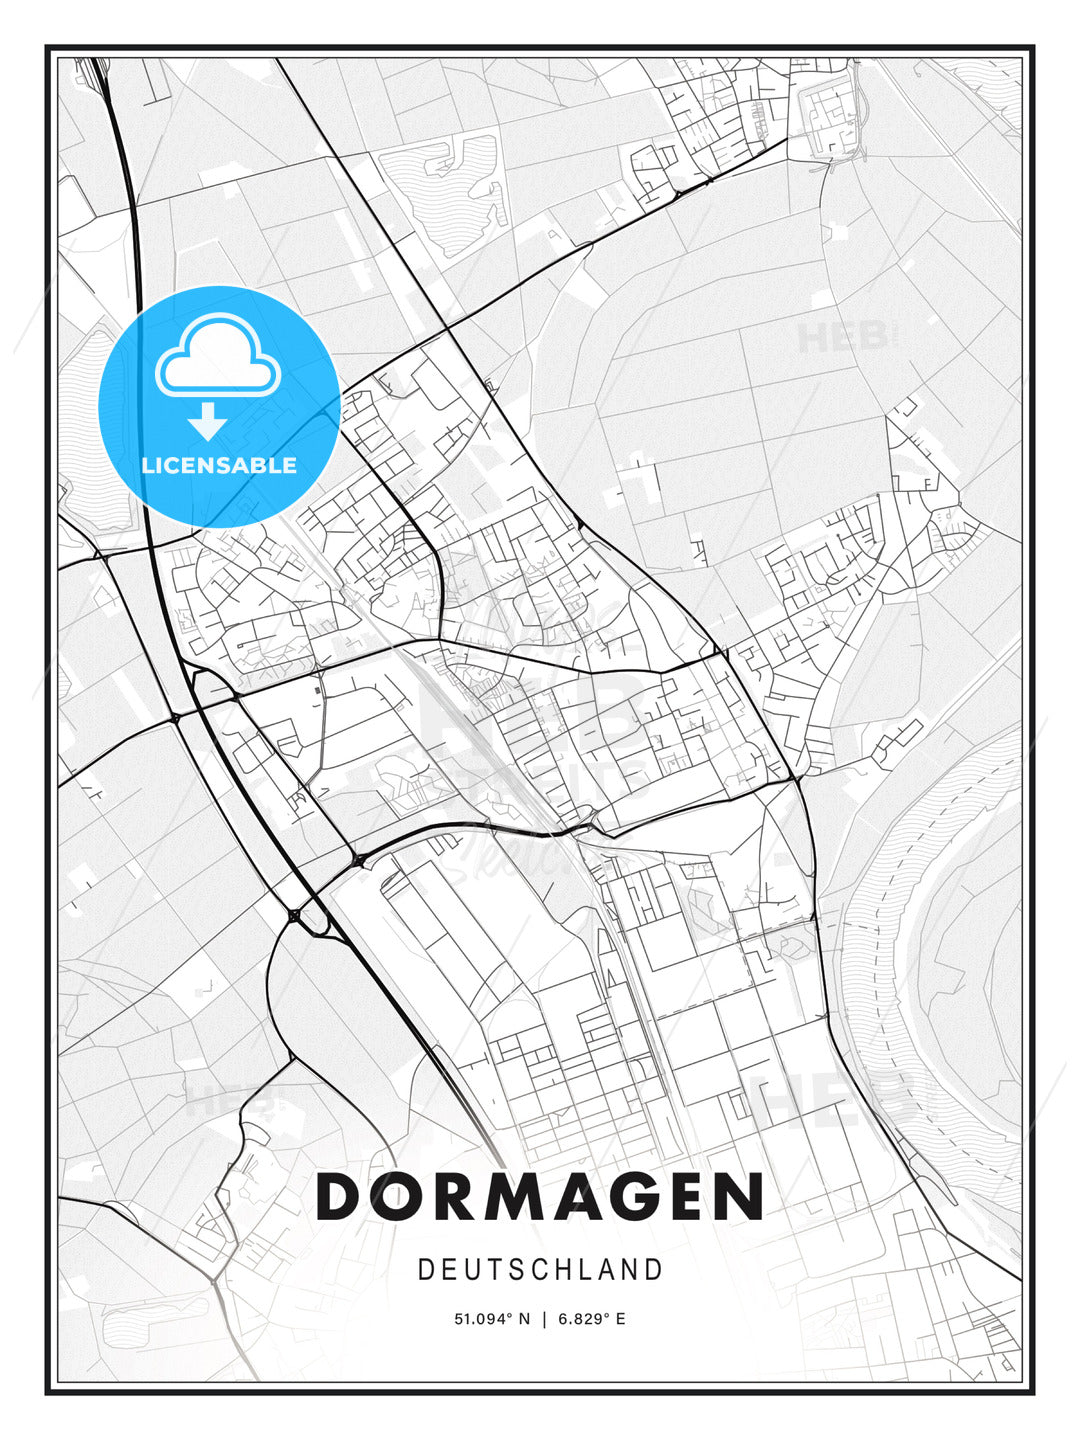 Dormagen, Germany, Modern Print Template in Various Formats - HEBSTREITS Sketches